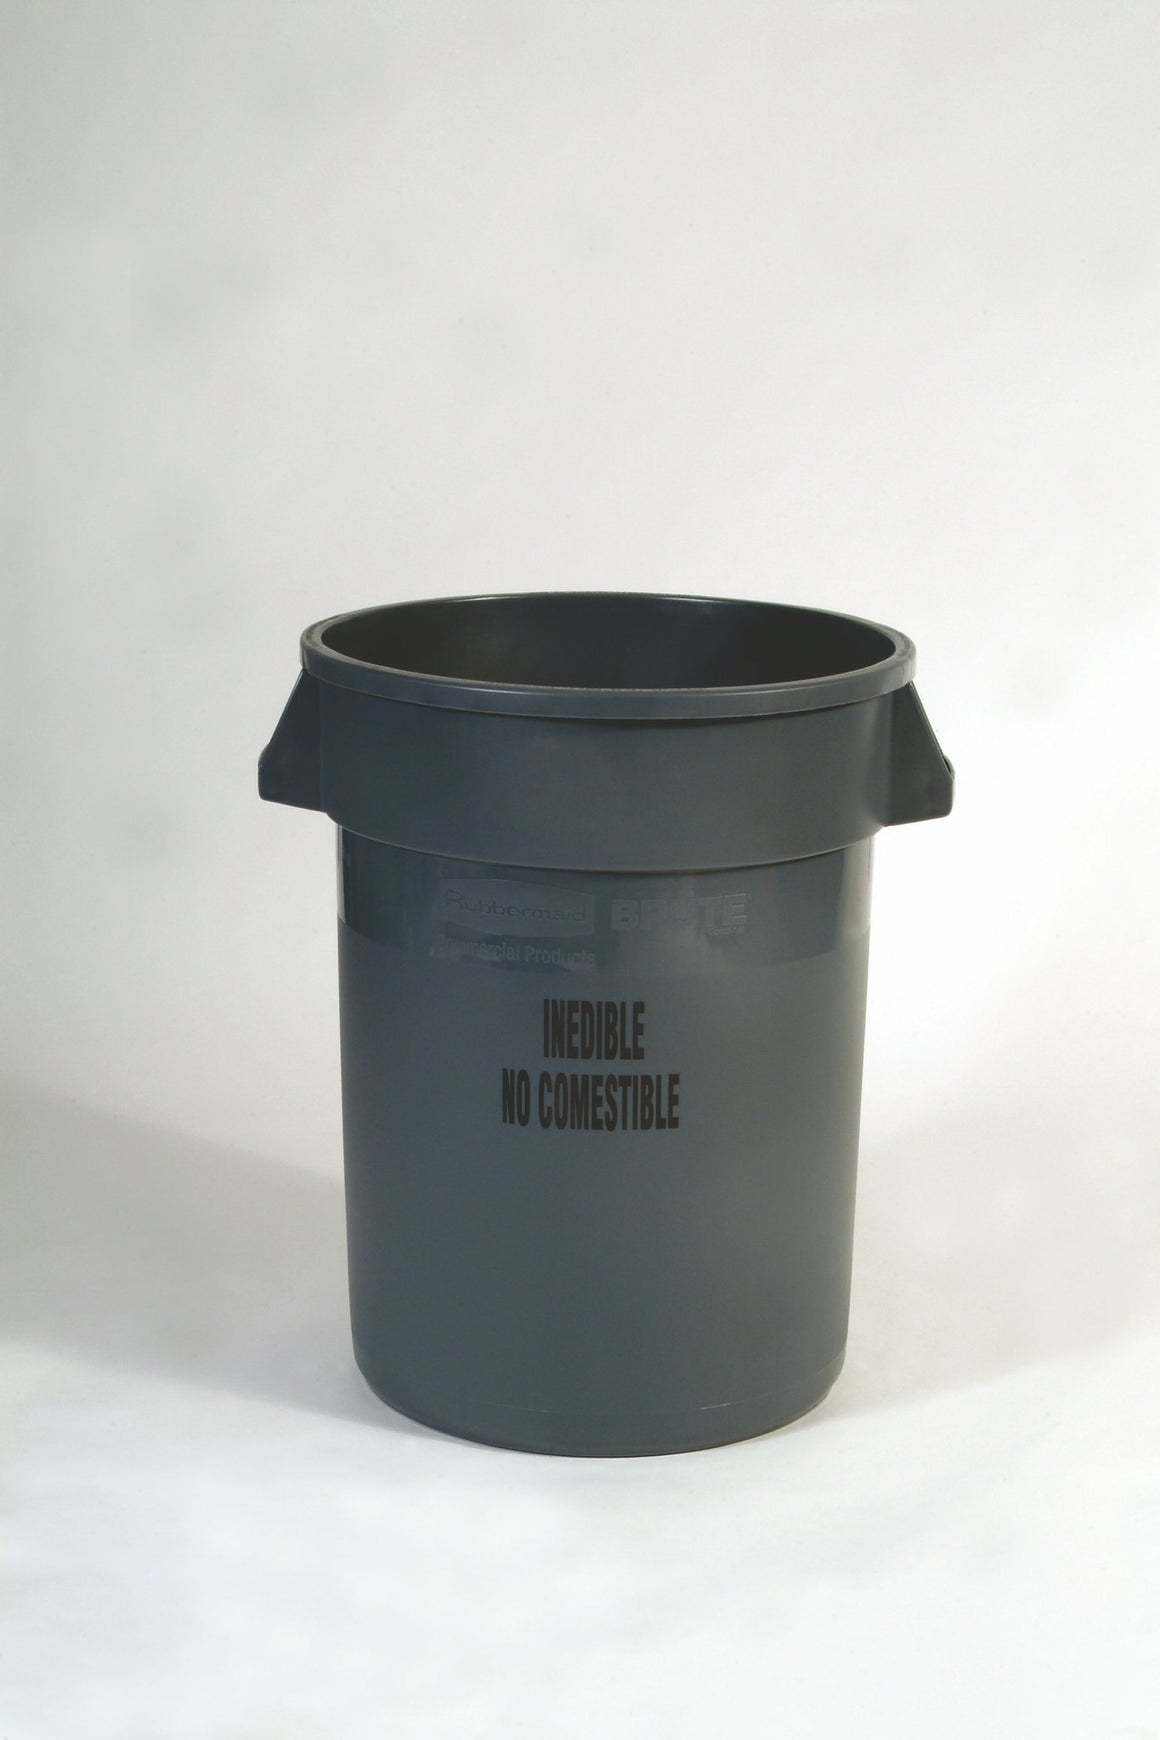 BRUTE CONTAINER 32gal W/O LID GRAY "INEDIBLE" IMPRINT